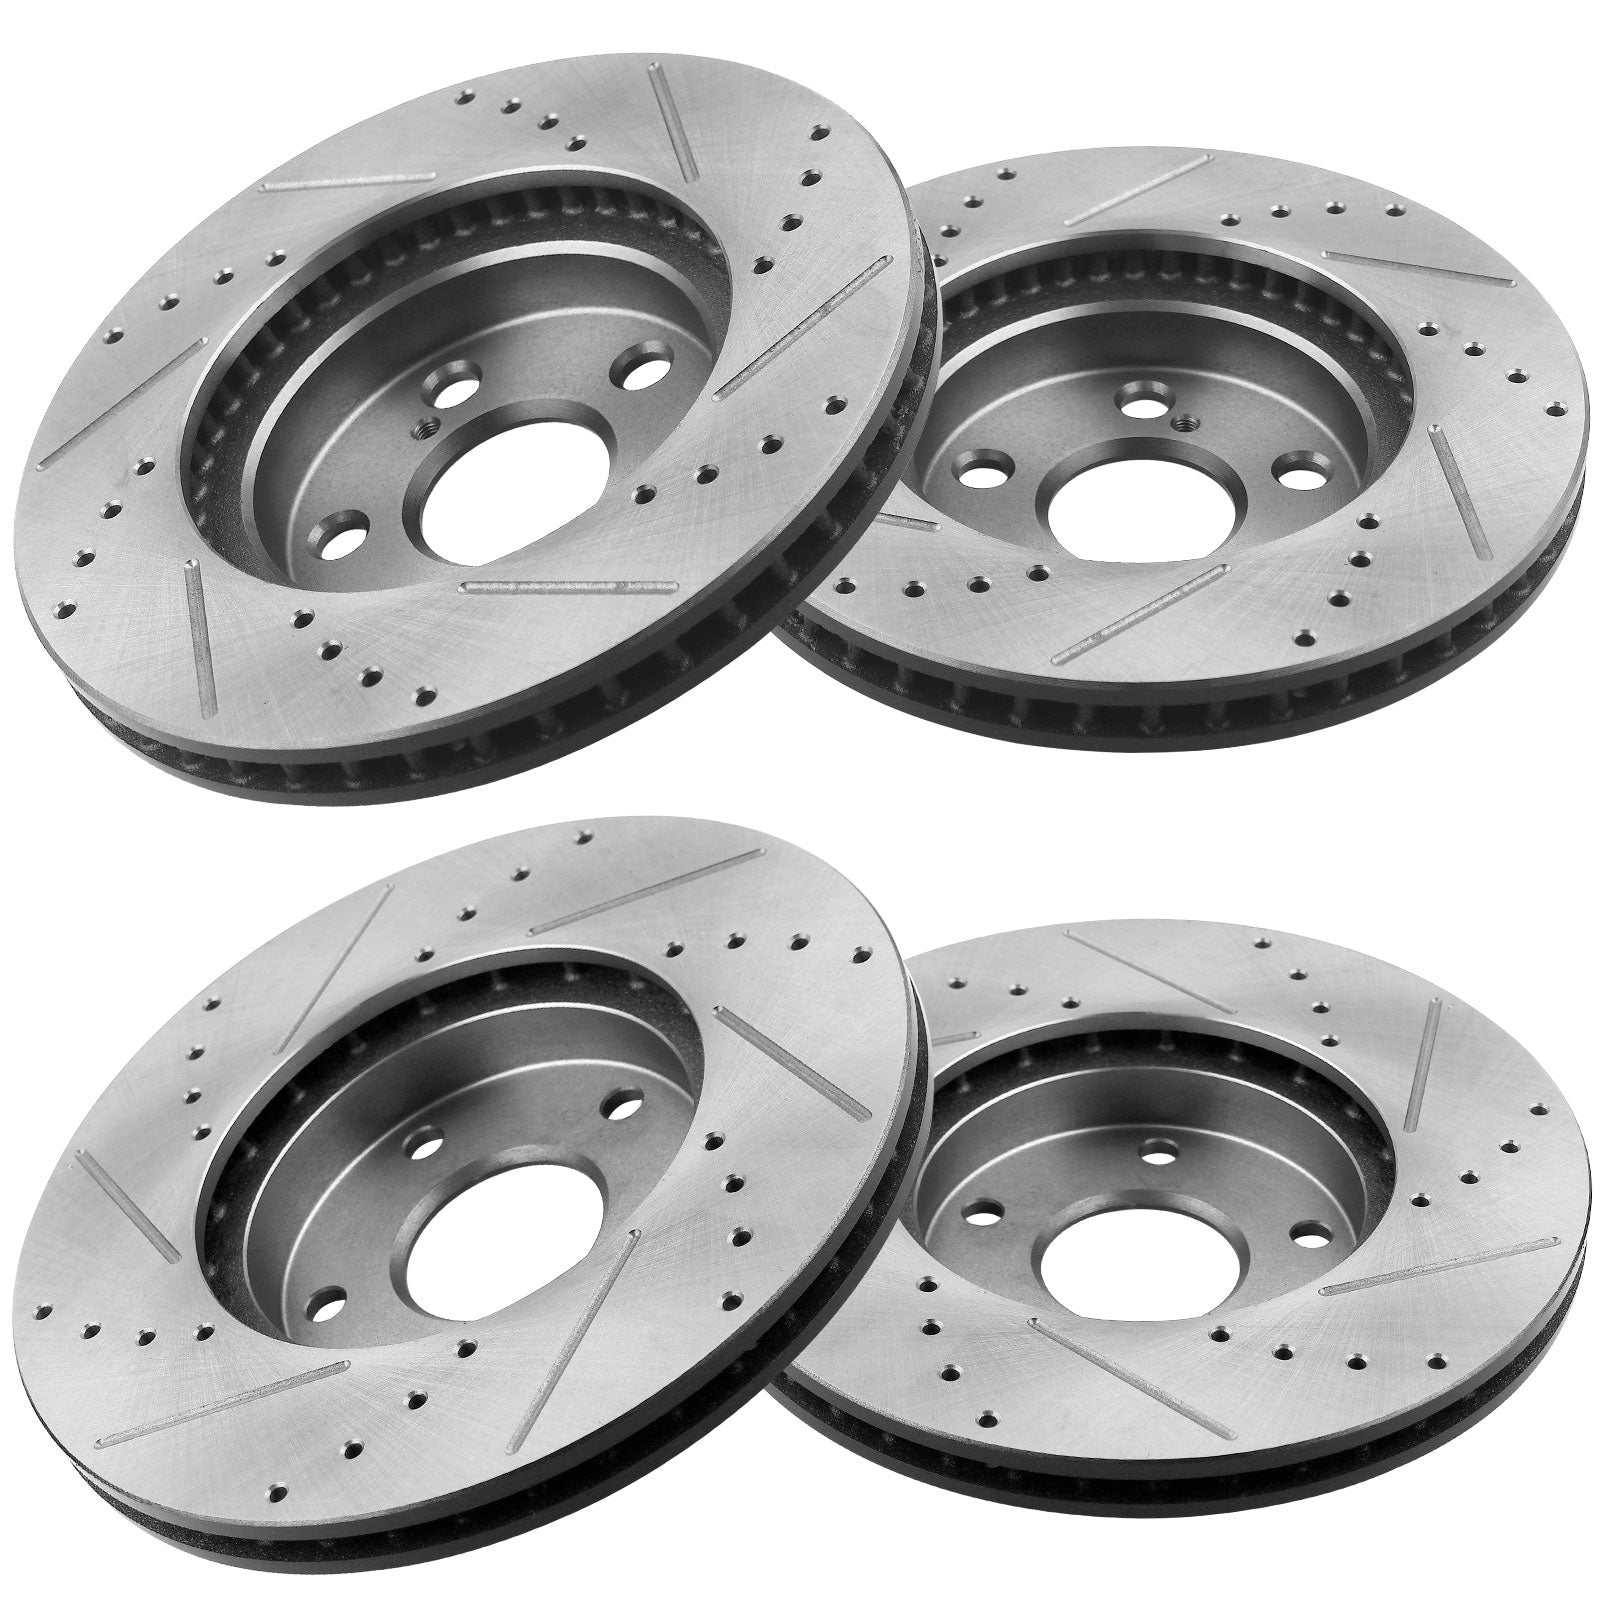 Front & Rear Drilled & Slotted Disc Brake Rotors + Ceramic Pads + Cleaner & Fluid Fits for 2011-2016 Lexus CT200h, 2010-2015 Toyota Prius, 2014-2015 Toyota Prius Plug-In MotorbyMotor